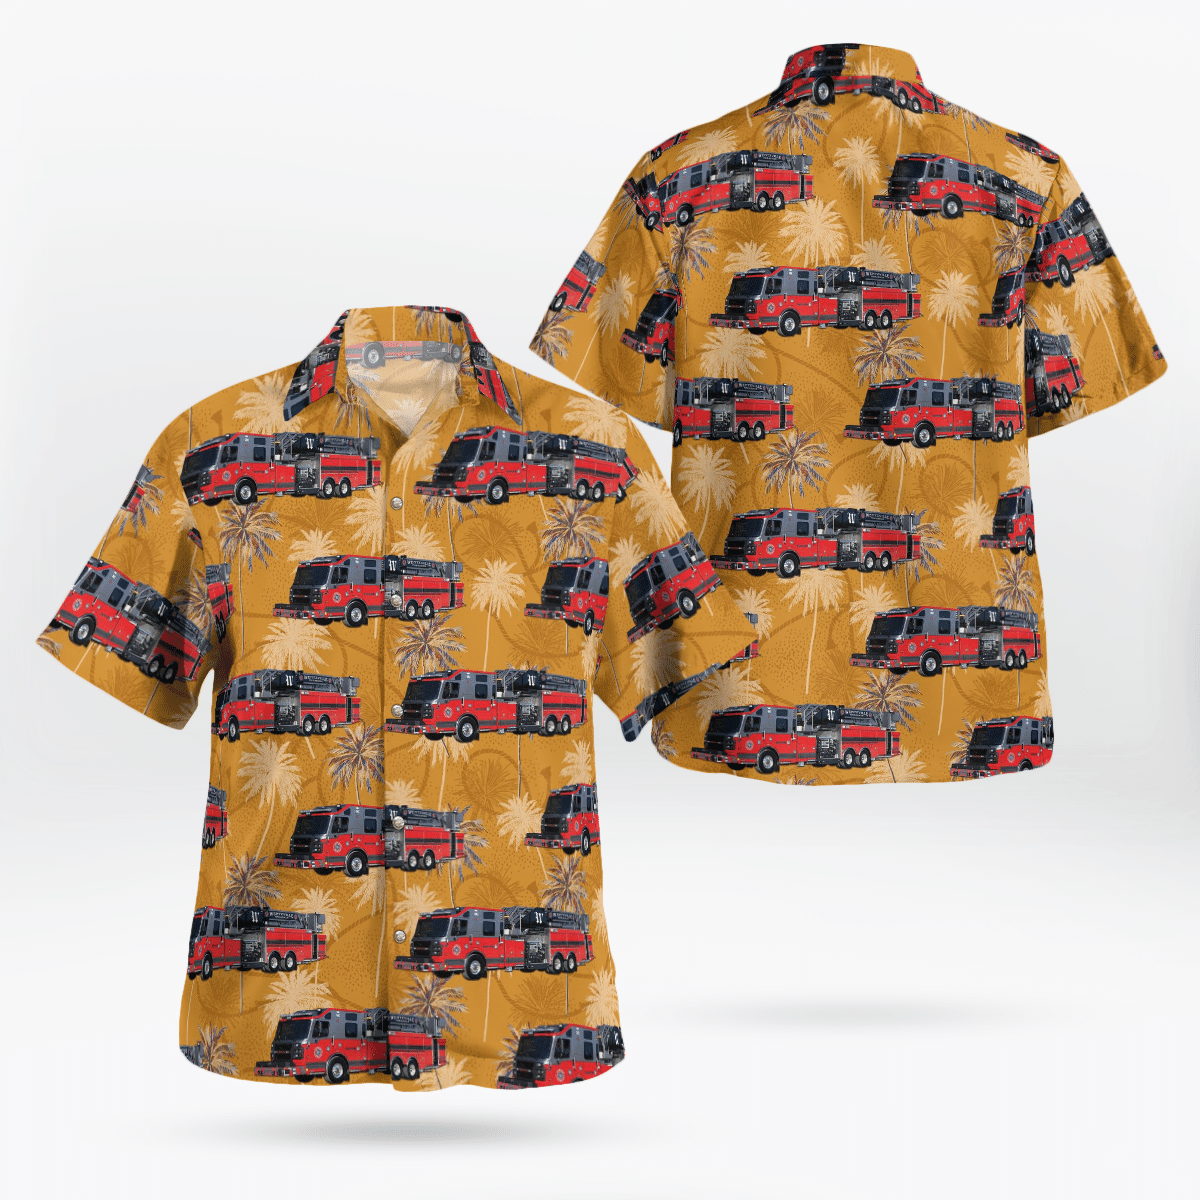 Consider getting these Hawaiian Shirt for your friends 445